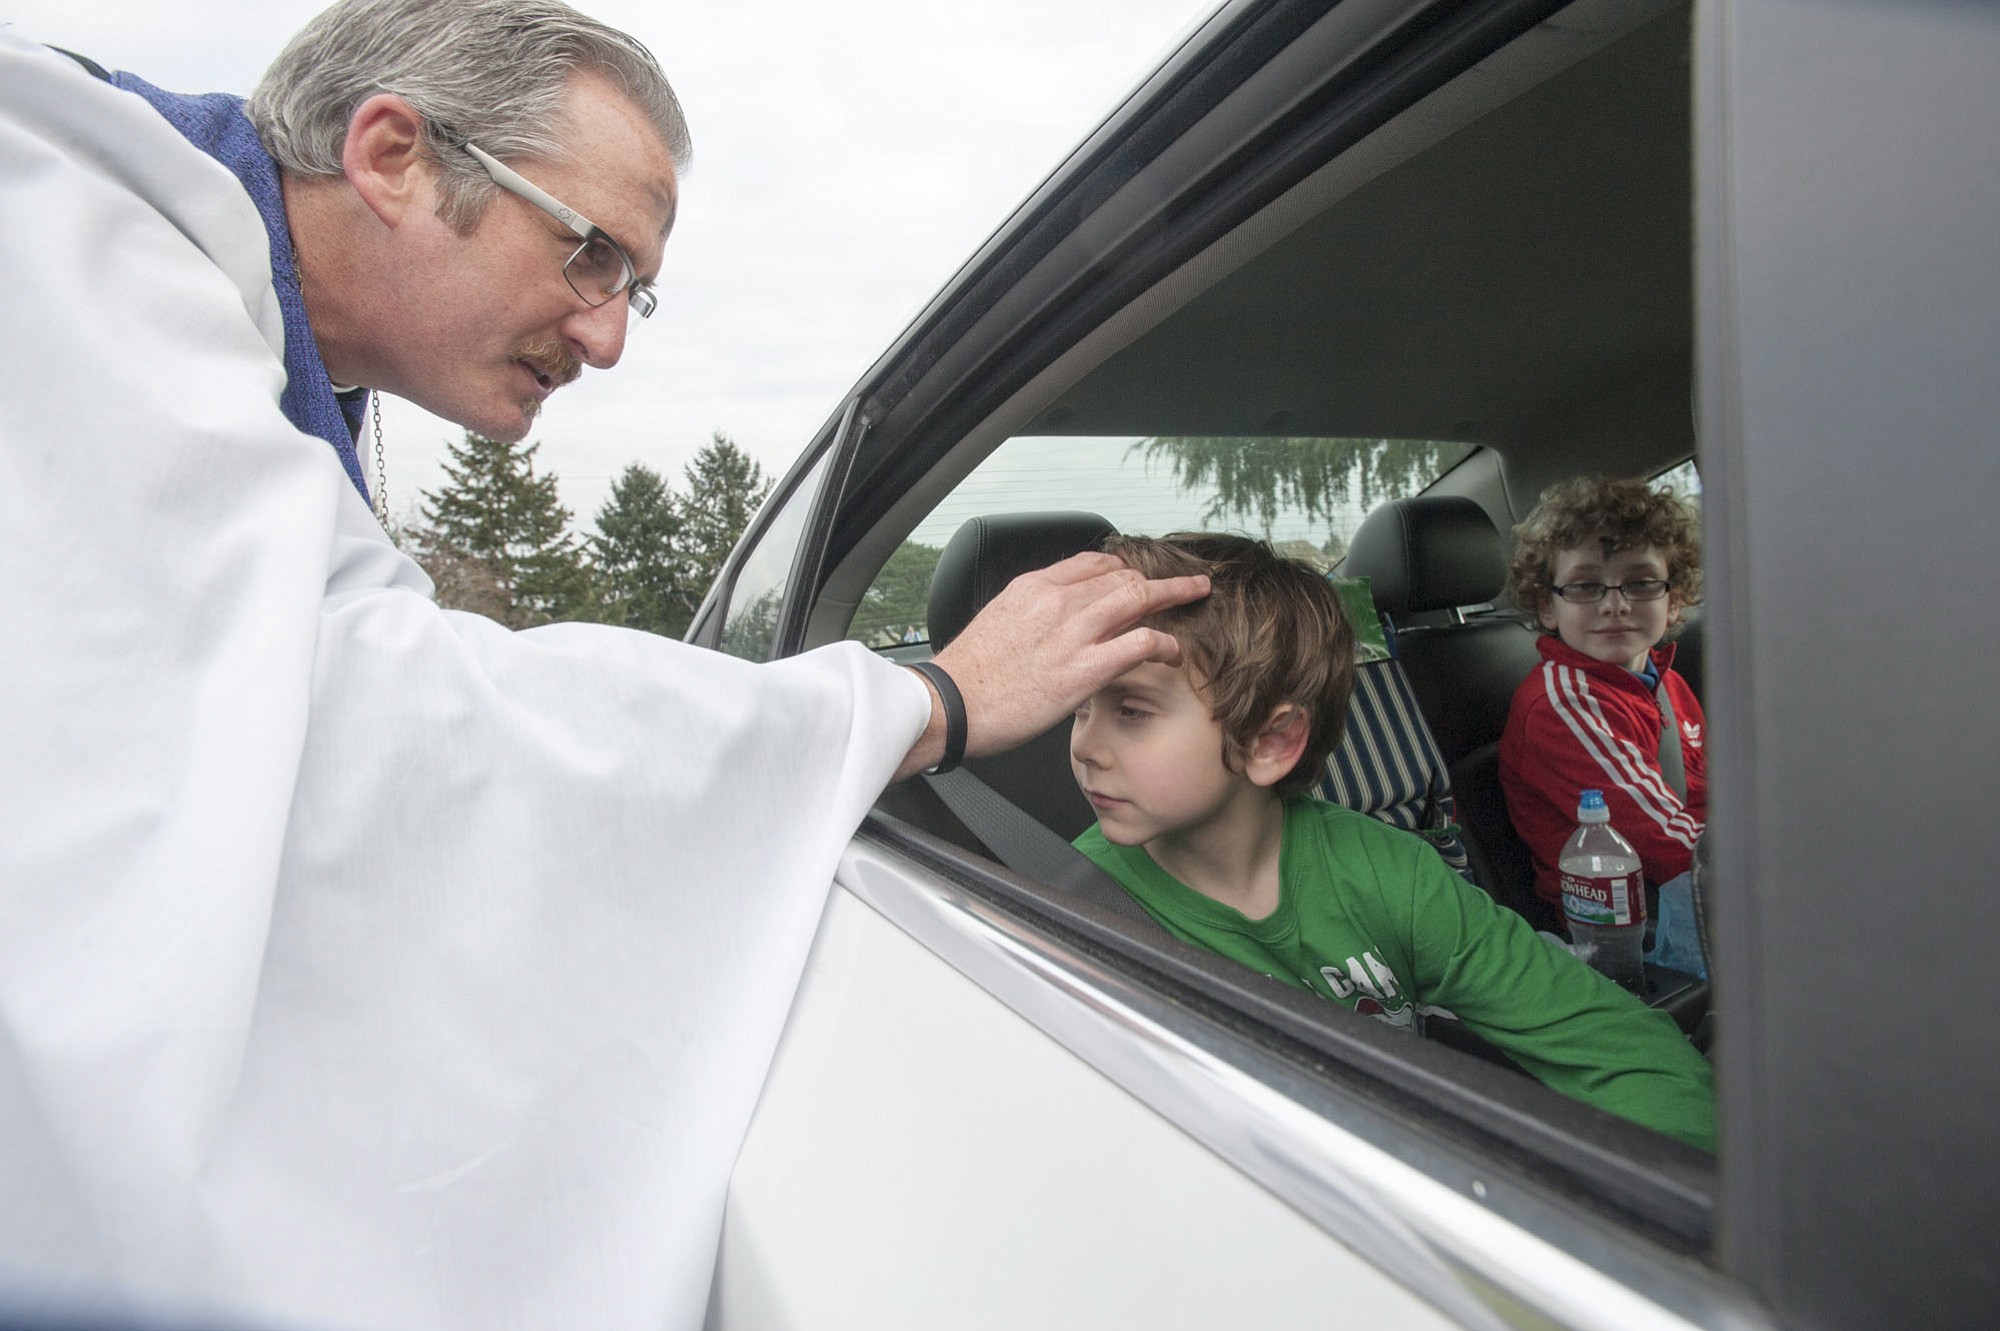 Gavin Waggoner, in green, gets smudged from the comfort of his car seat by the Rev. Tom Warne.